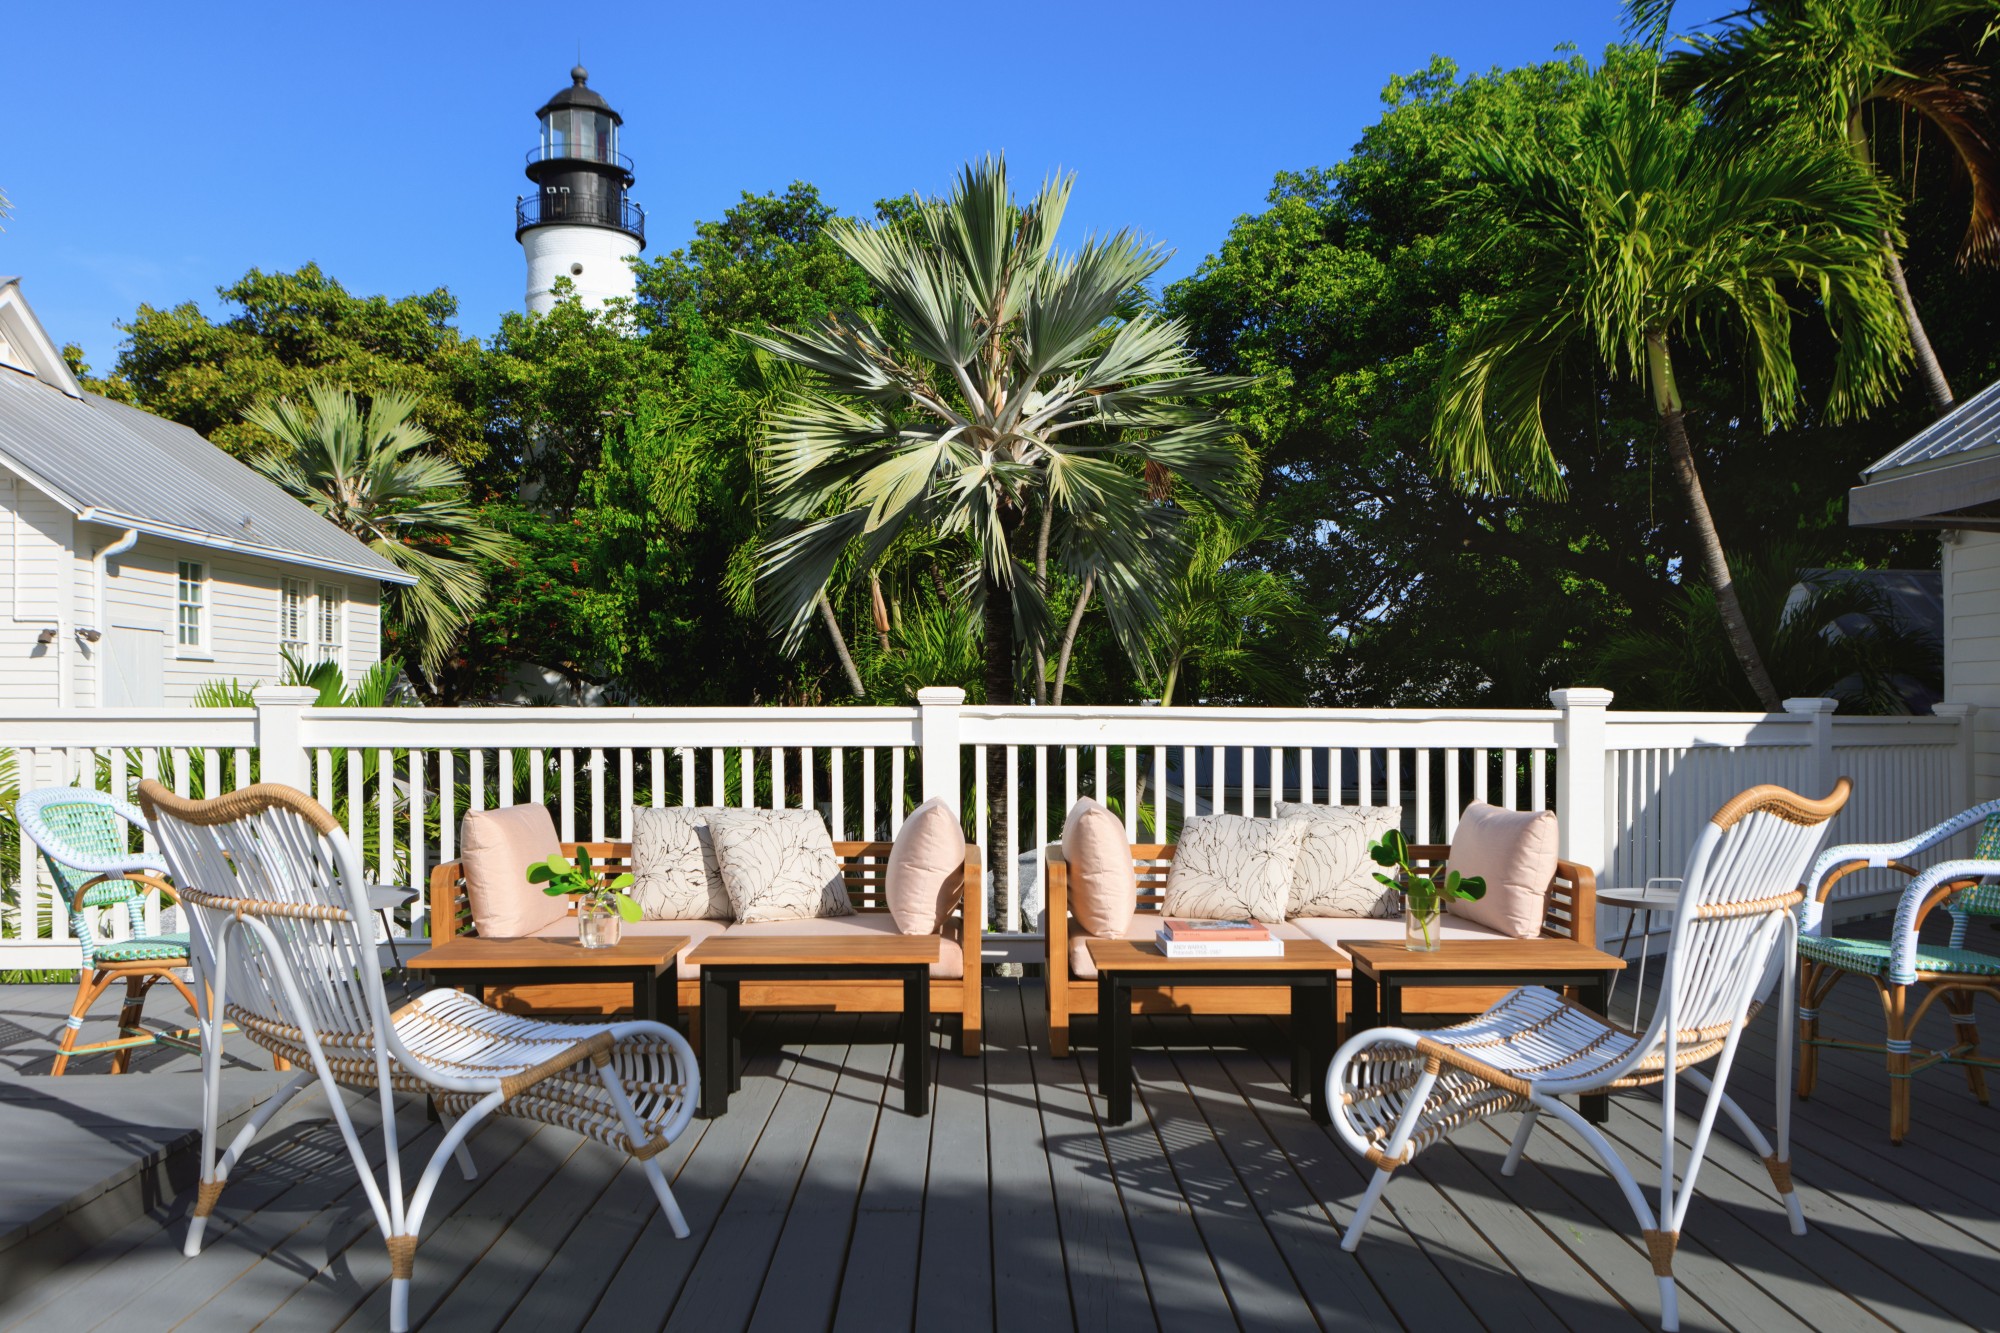 An outdoor patio with wicker furniture. In the background there are palm trees and a lighthouse